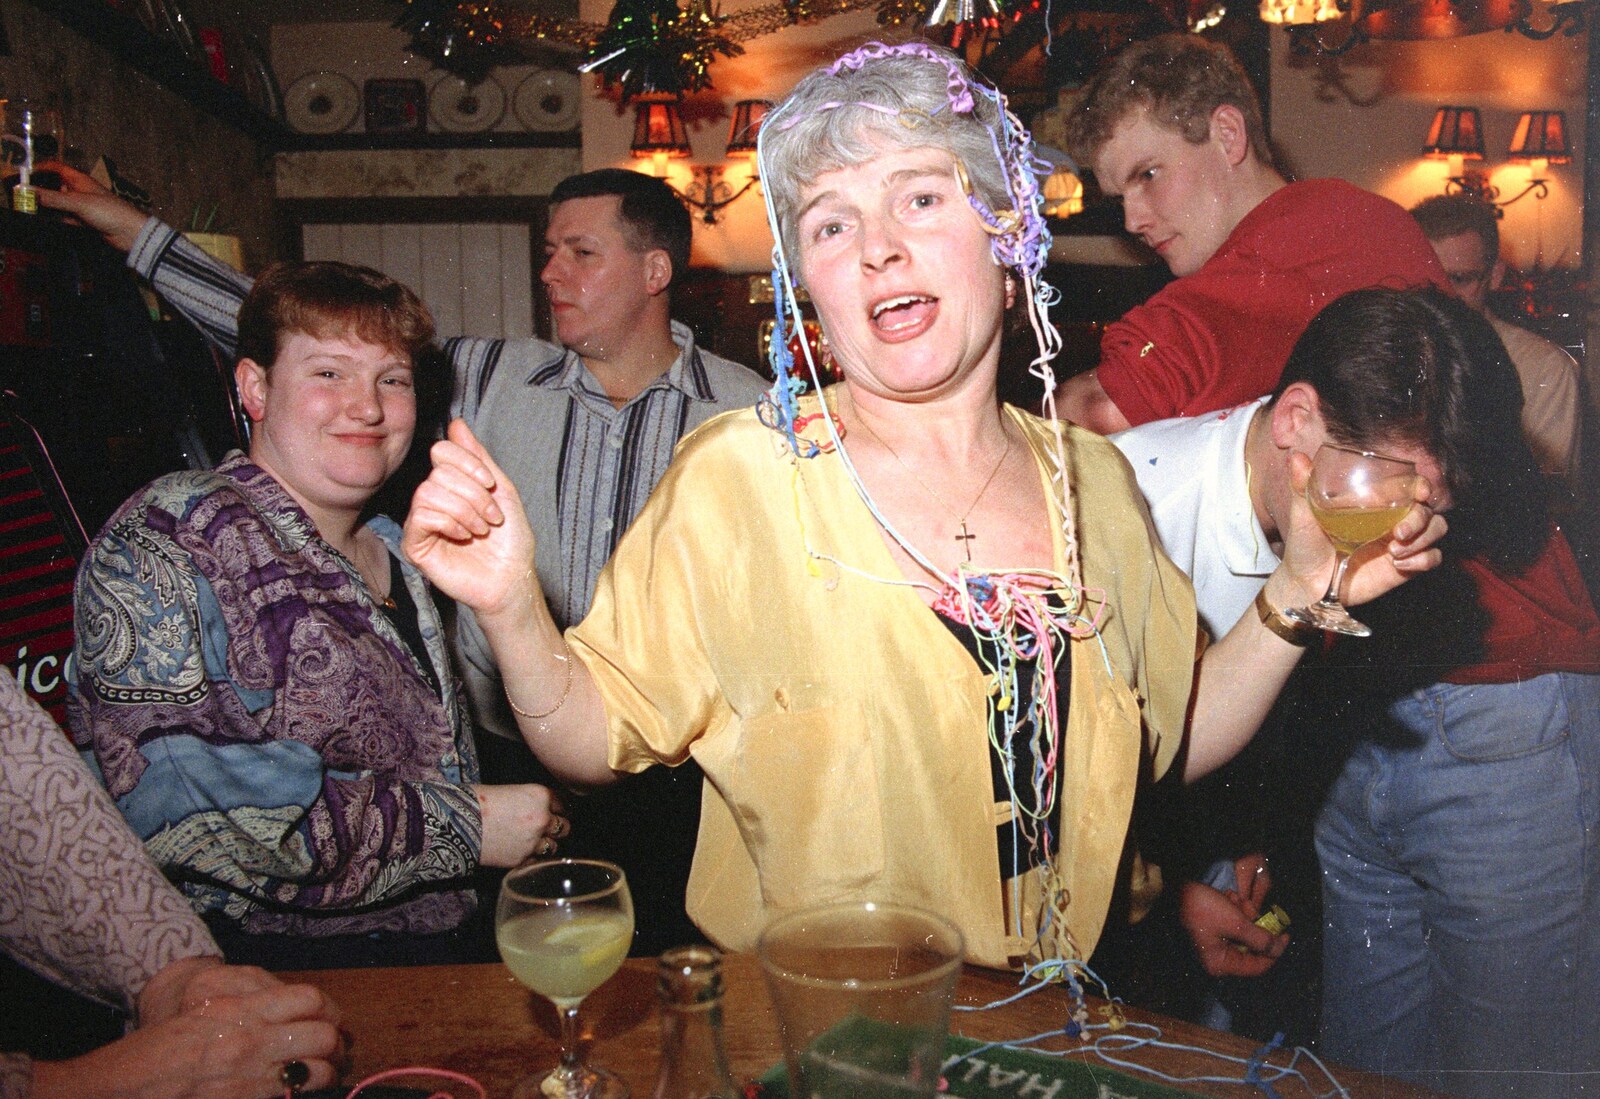 Spammy with a garland of streamers from New Year's Eve at the Swan Inn, Brome, Suffolk - 31st December 1994